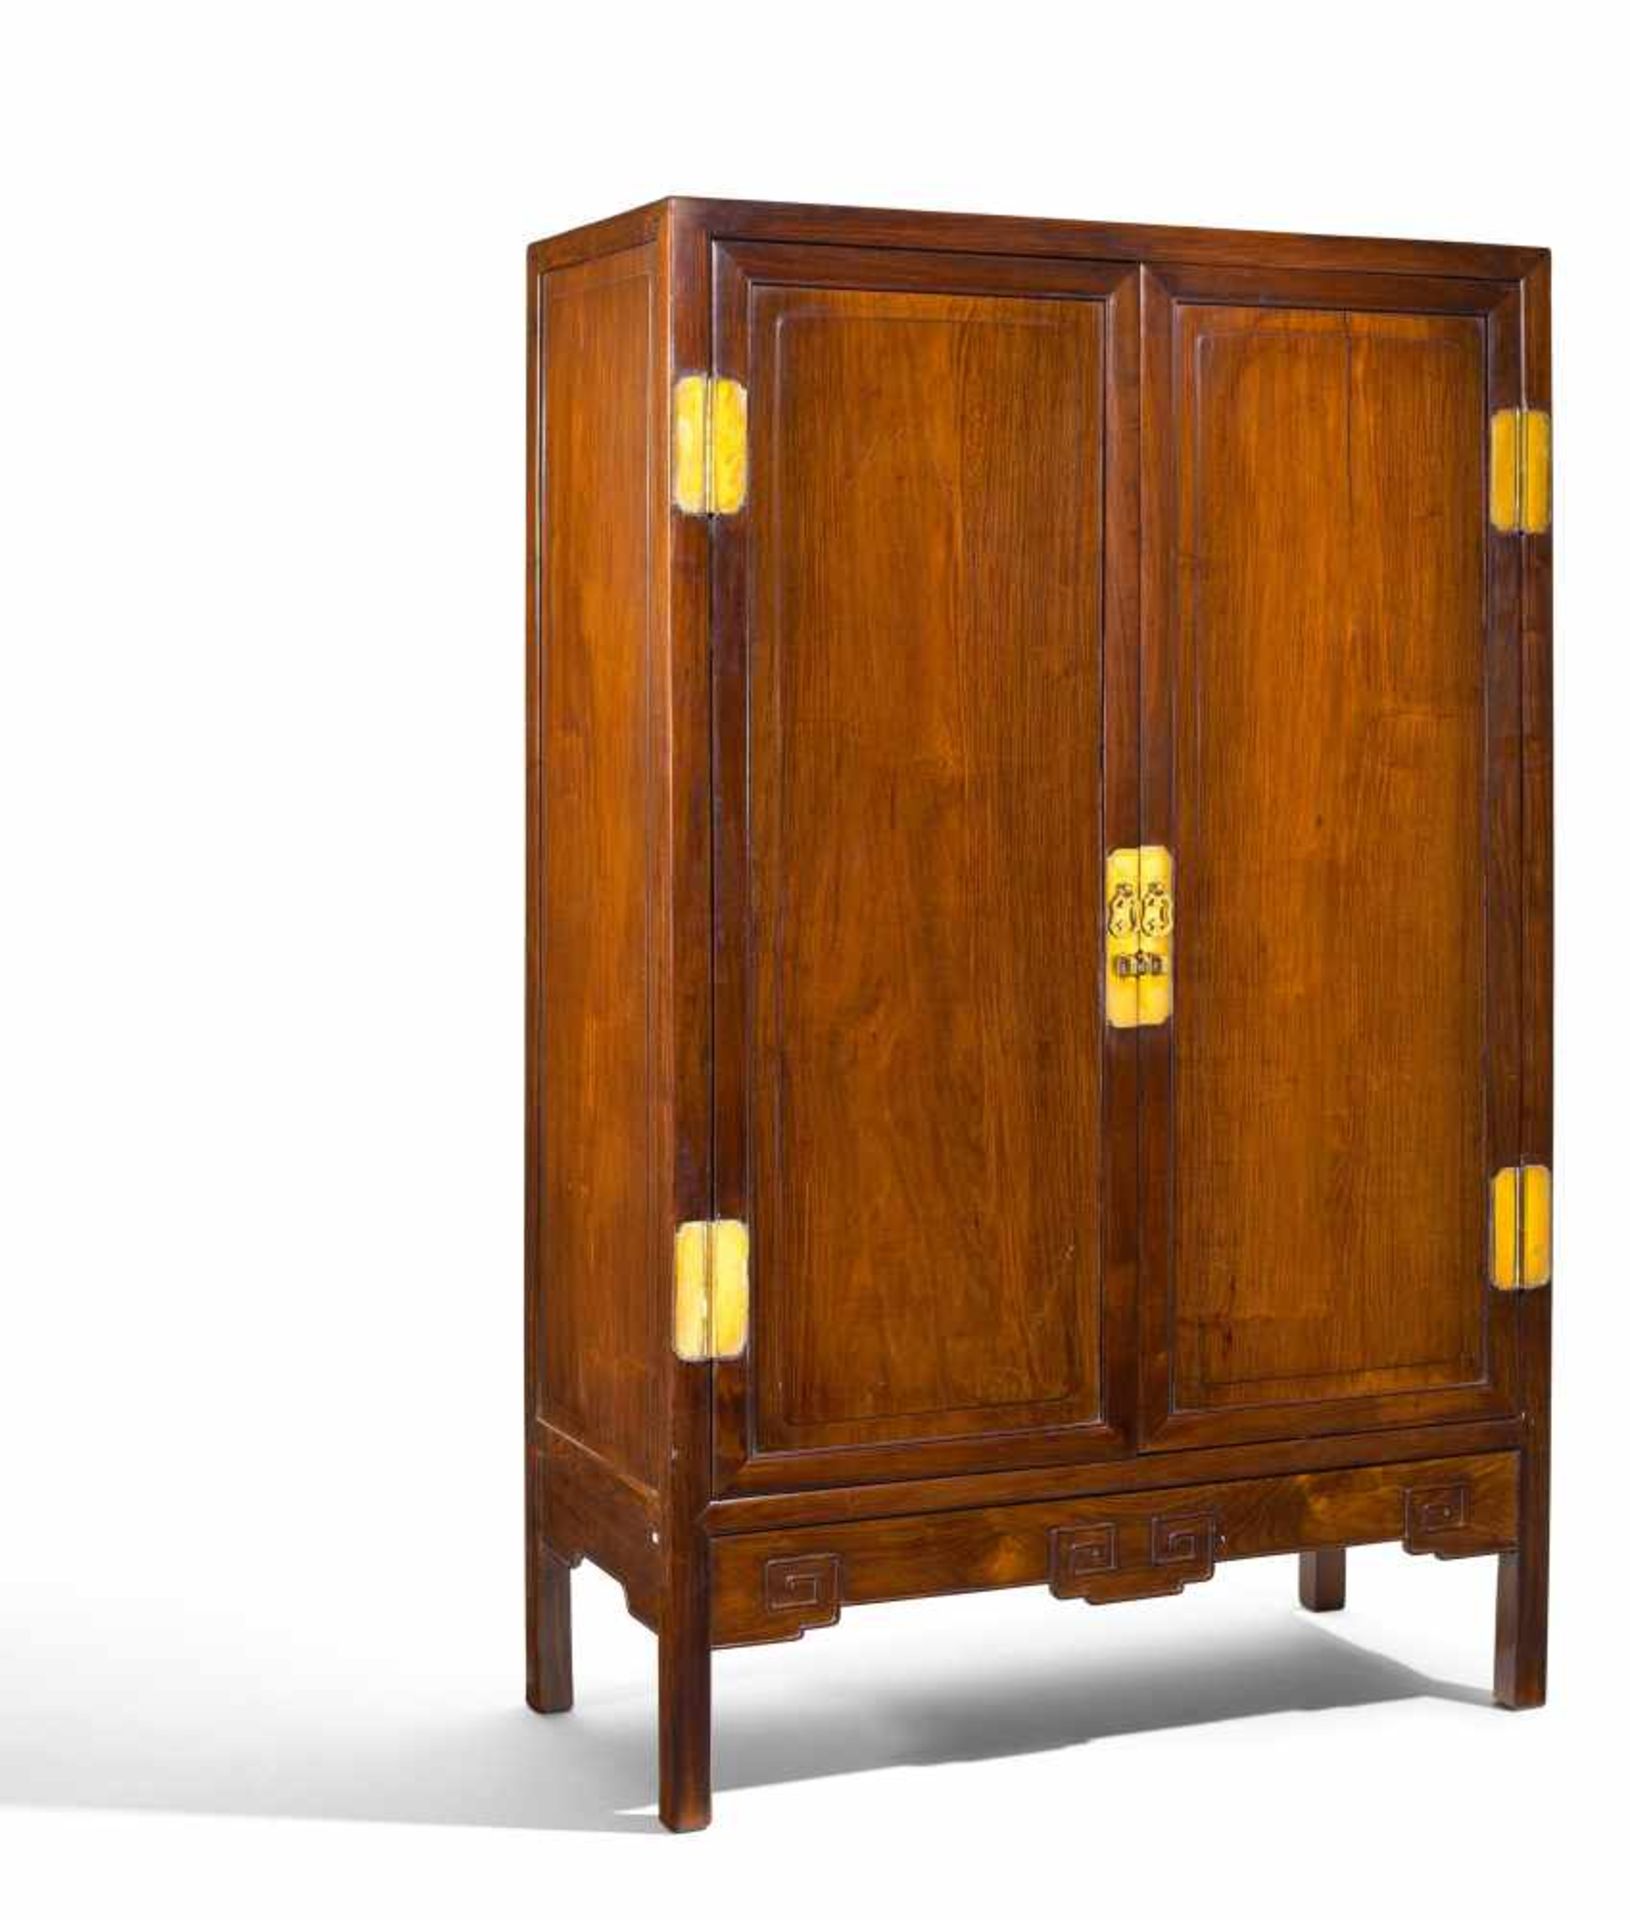 LARGE CABINET WITH DOUBLE DOORS AND INSIDE DRAWERS. China. Qing dynasty (1644-1911). Hardwood (